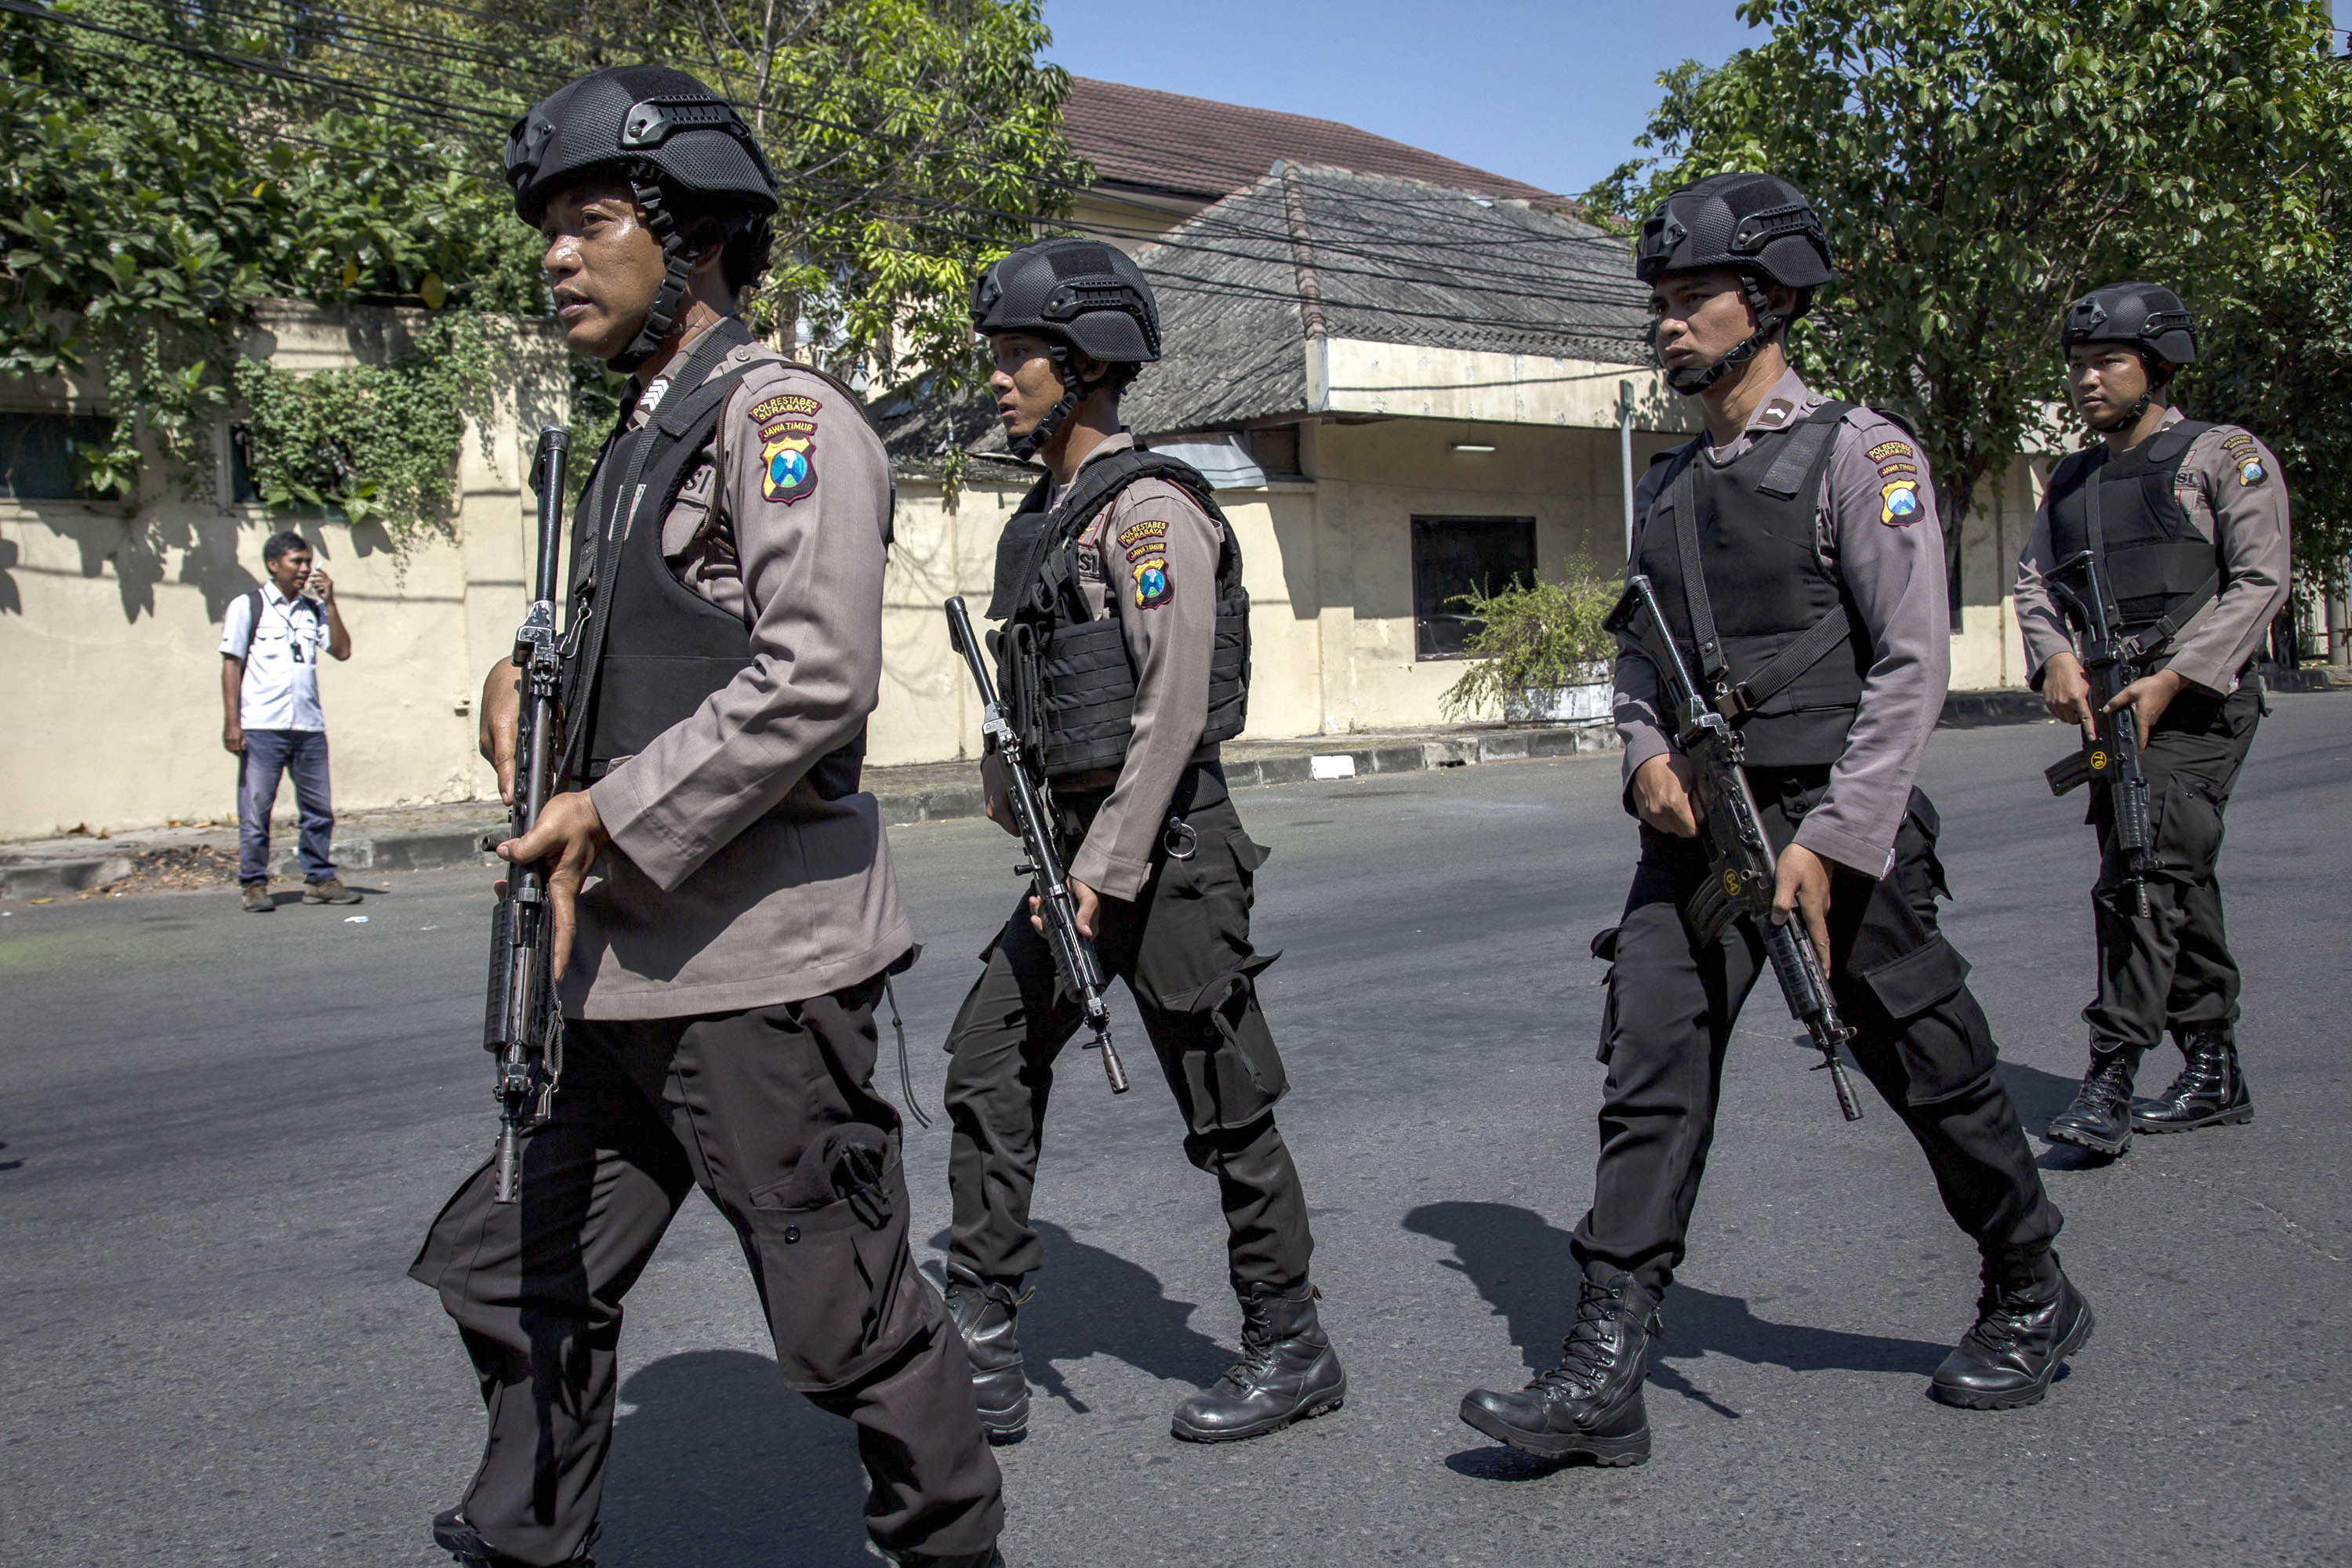 Indonesian police stand guard outside the Surabaya police station following another explosion on May 14, 2018 in Surabaya, Indonesia. (Ulet Ifansasti—Getty Images)